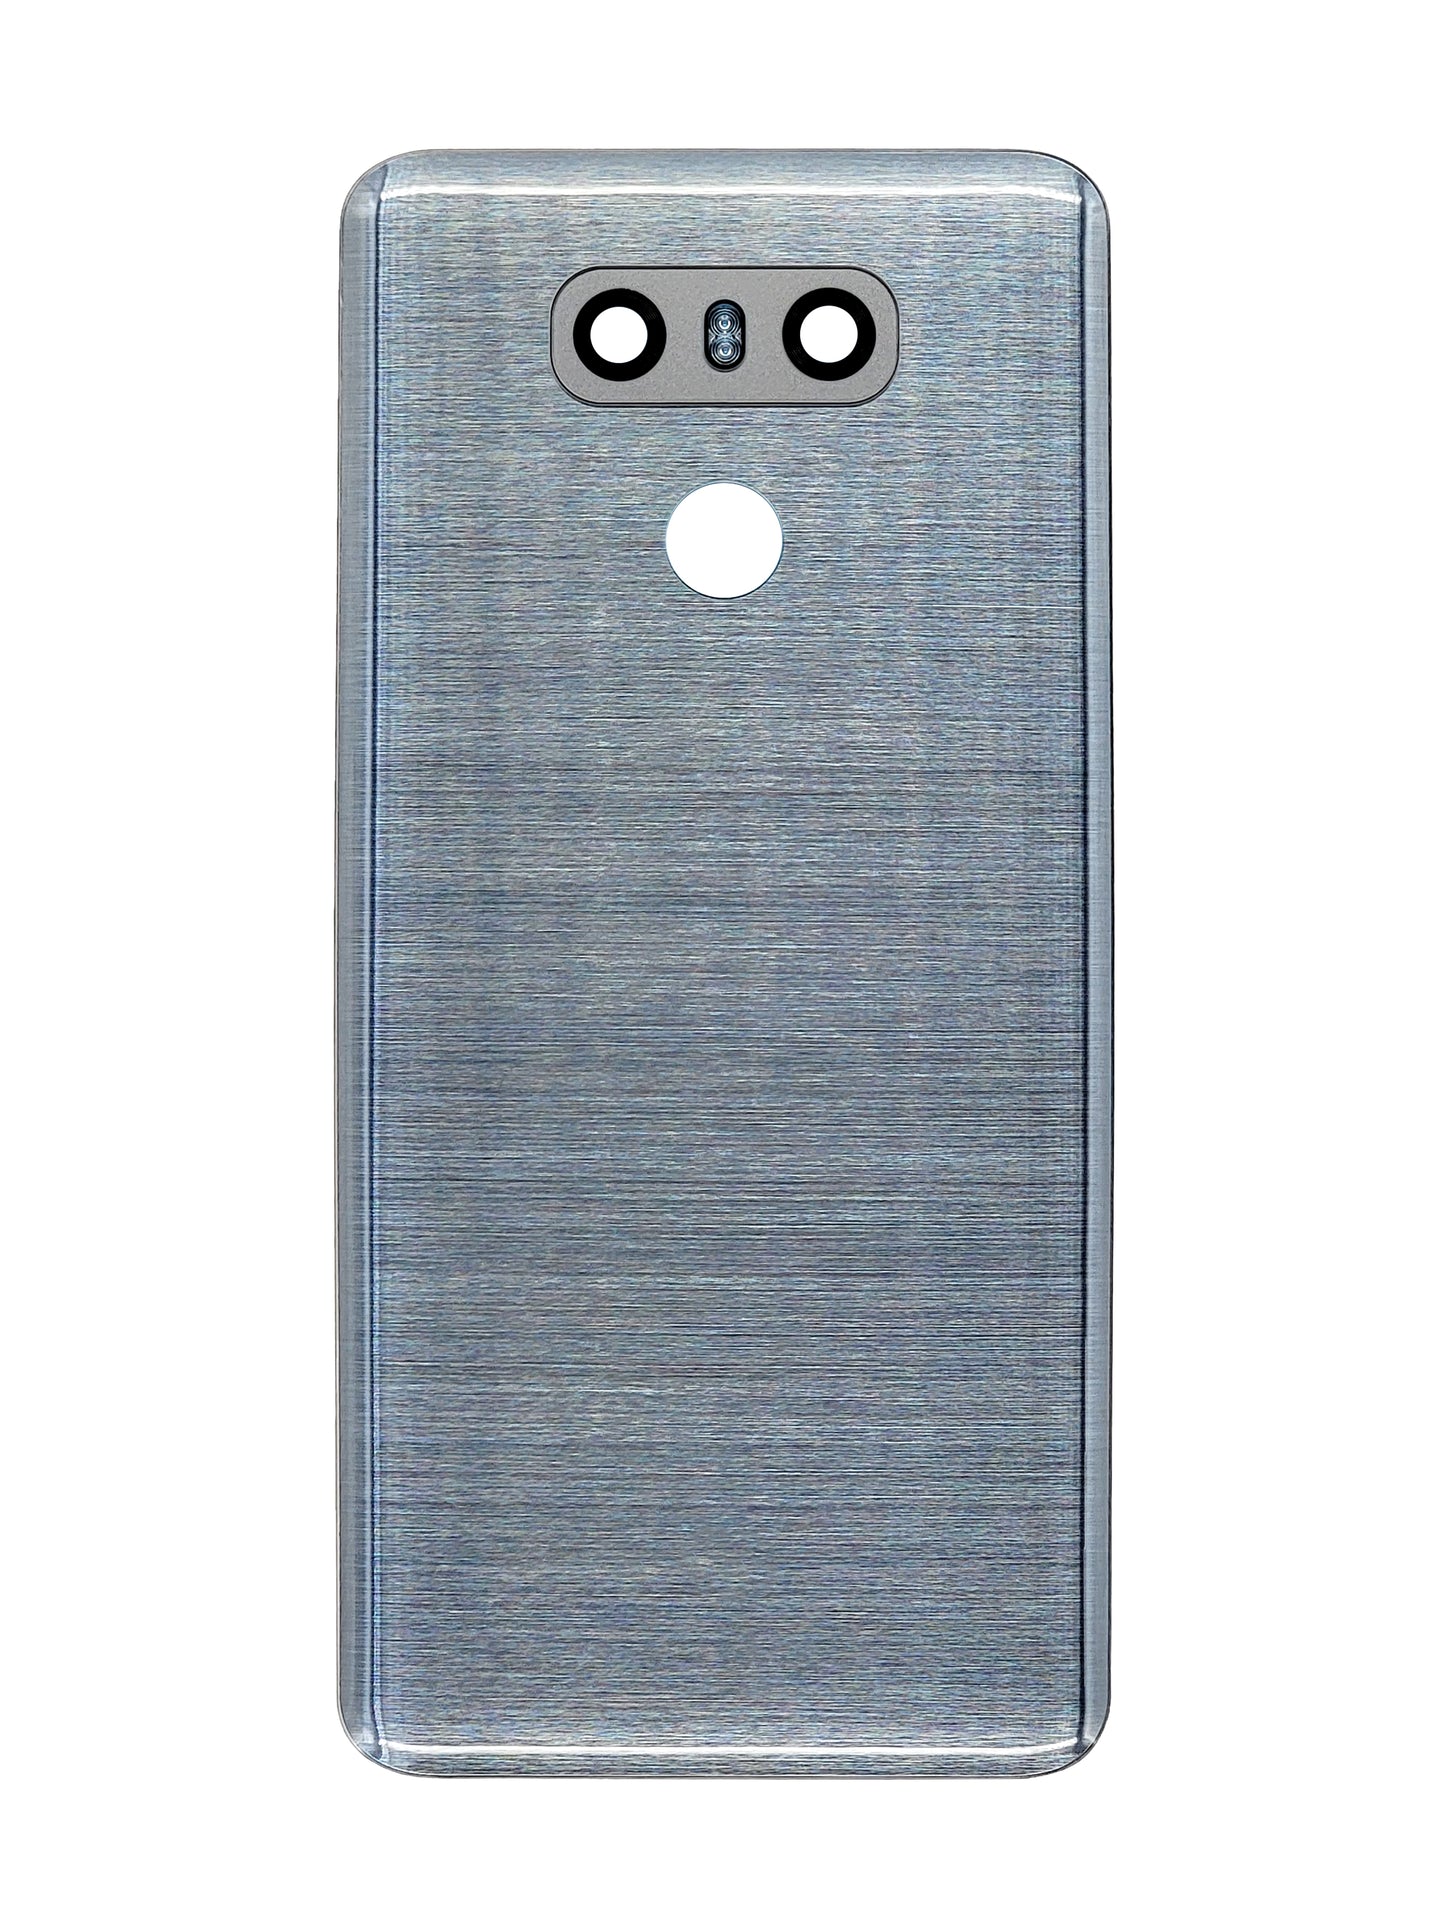 LGG G6 Back Cover (Silver)